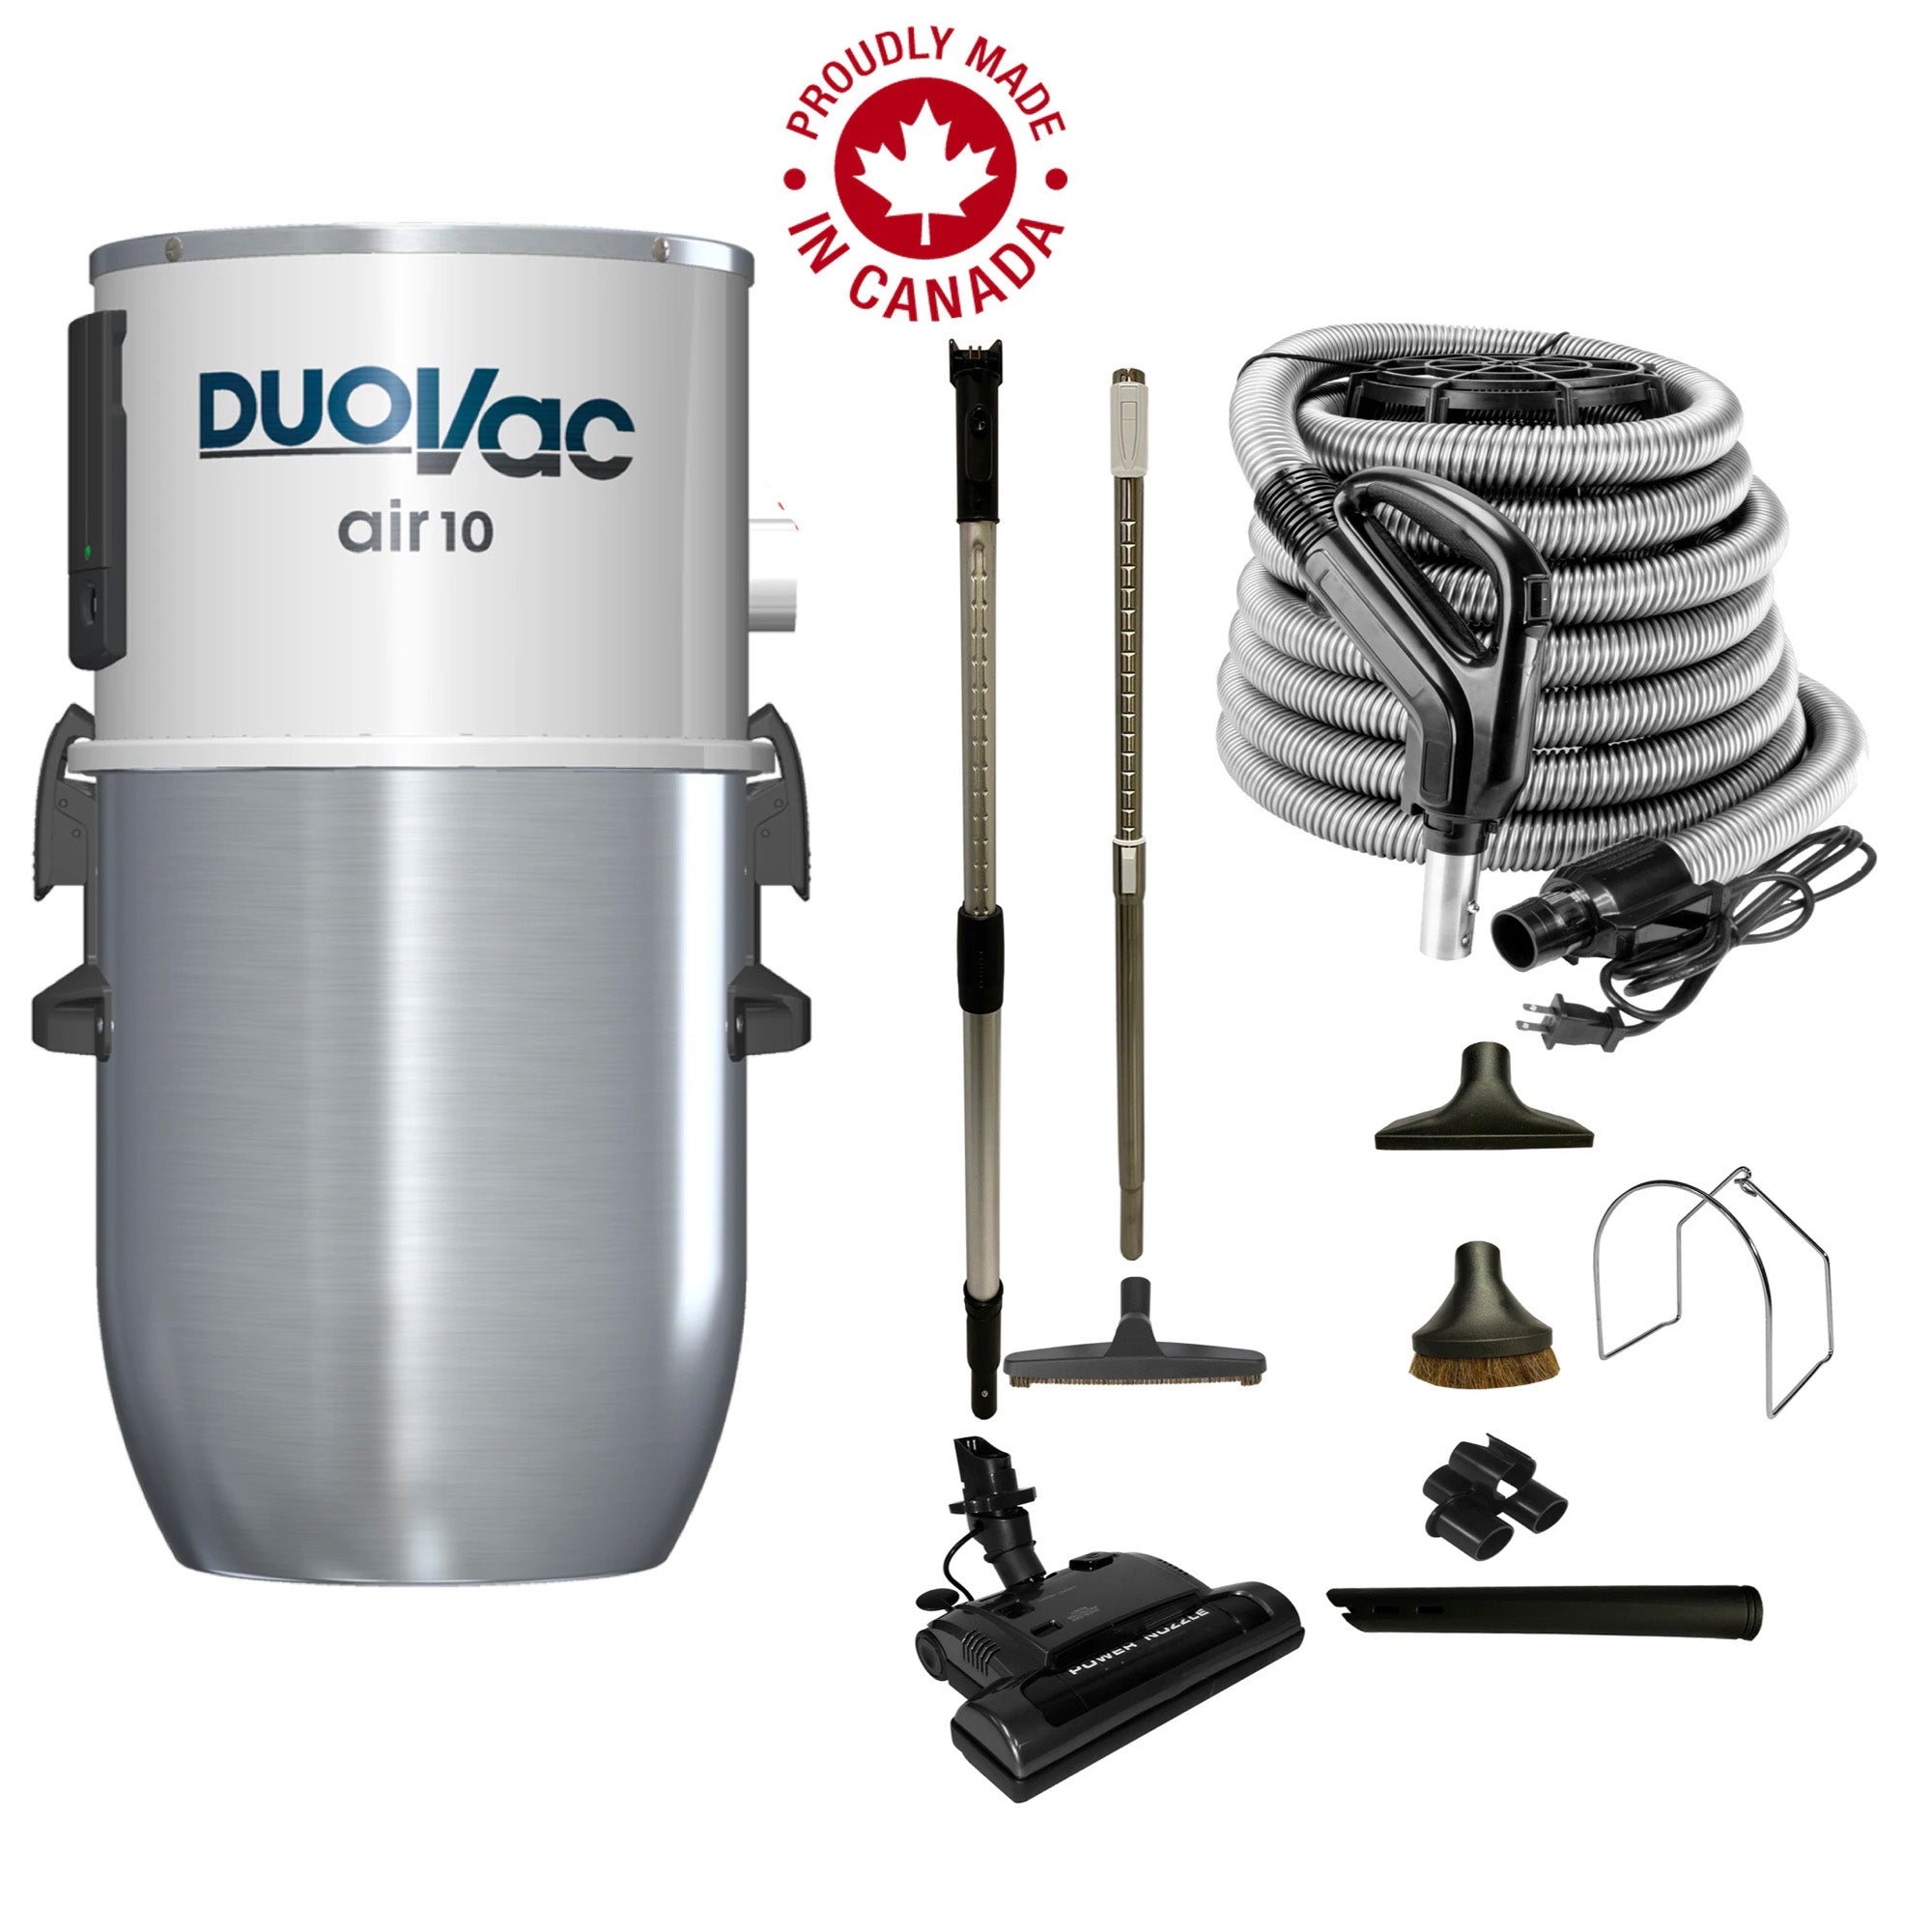 DuoVac Air 10 Central Vacuum with Standard Electric Package